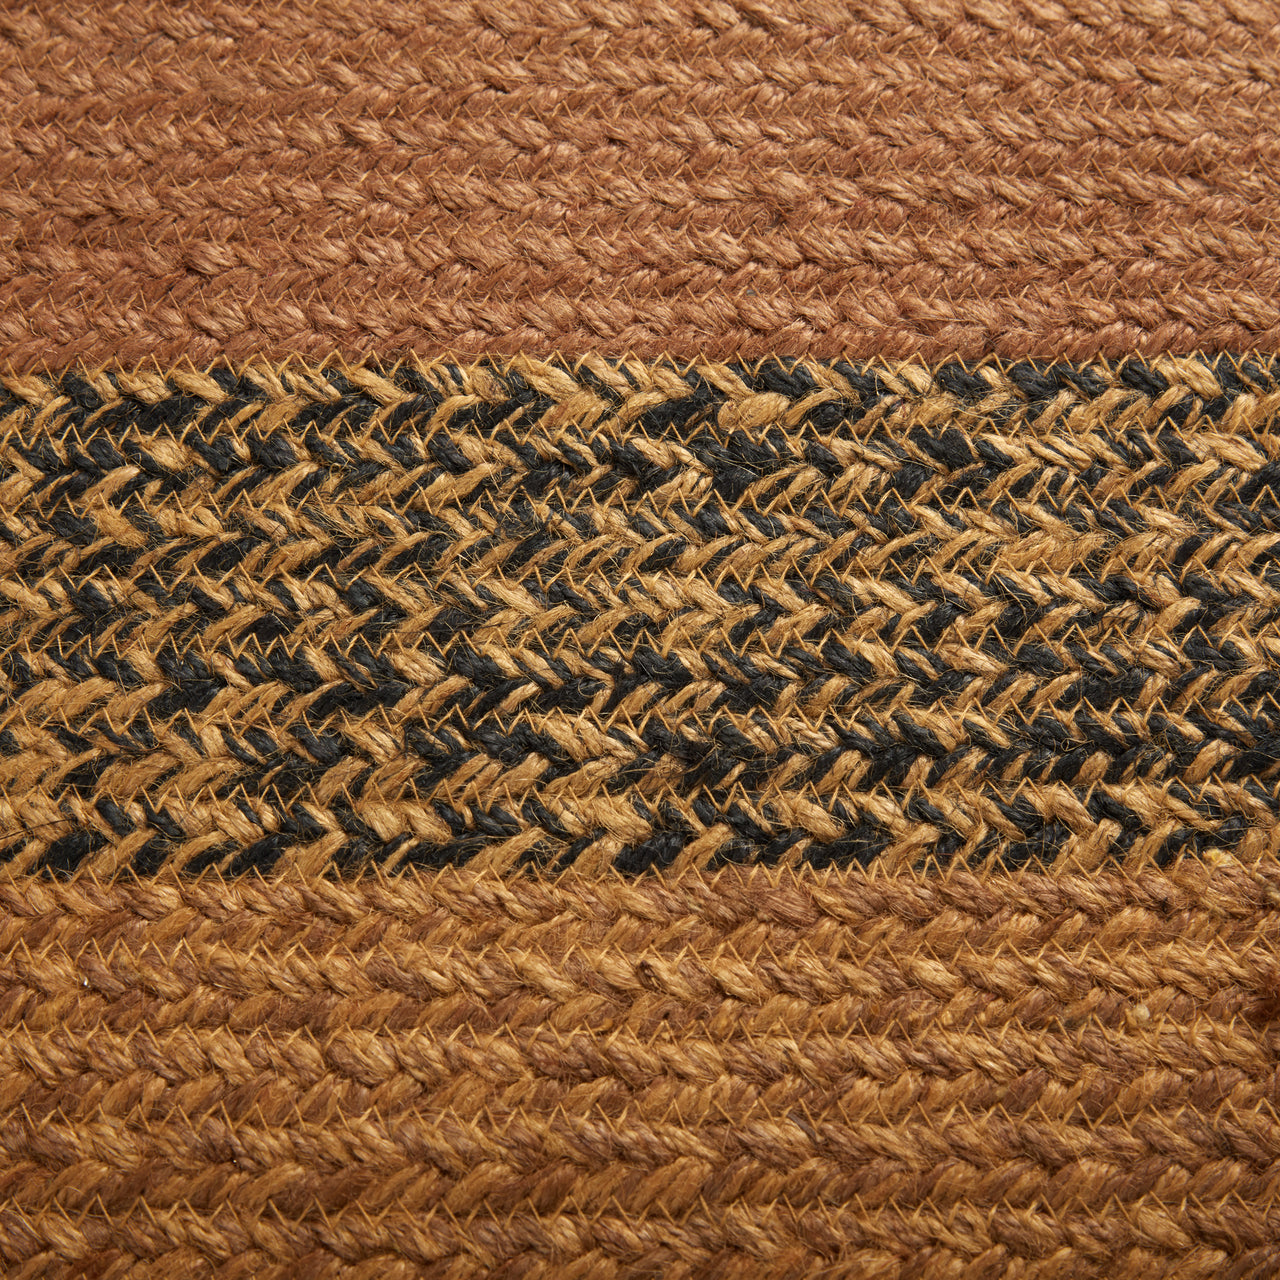 Kettle Grove Jute Braided Rug Rect 5'x8' with Rug Pad VHC Brands